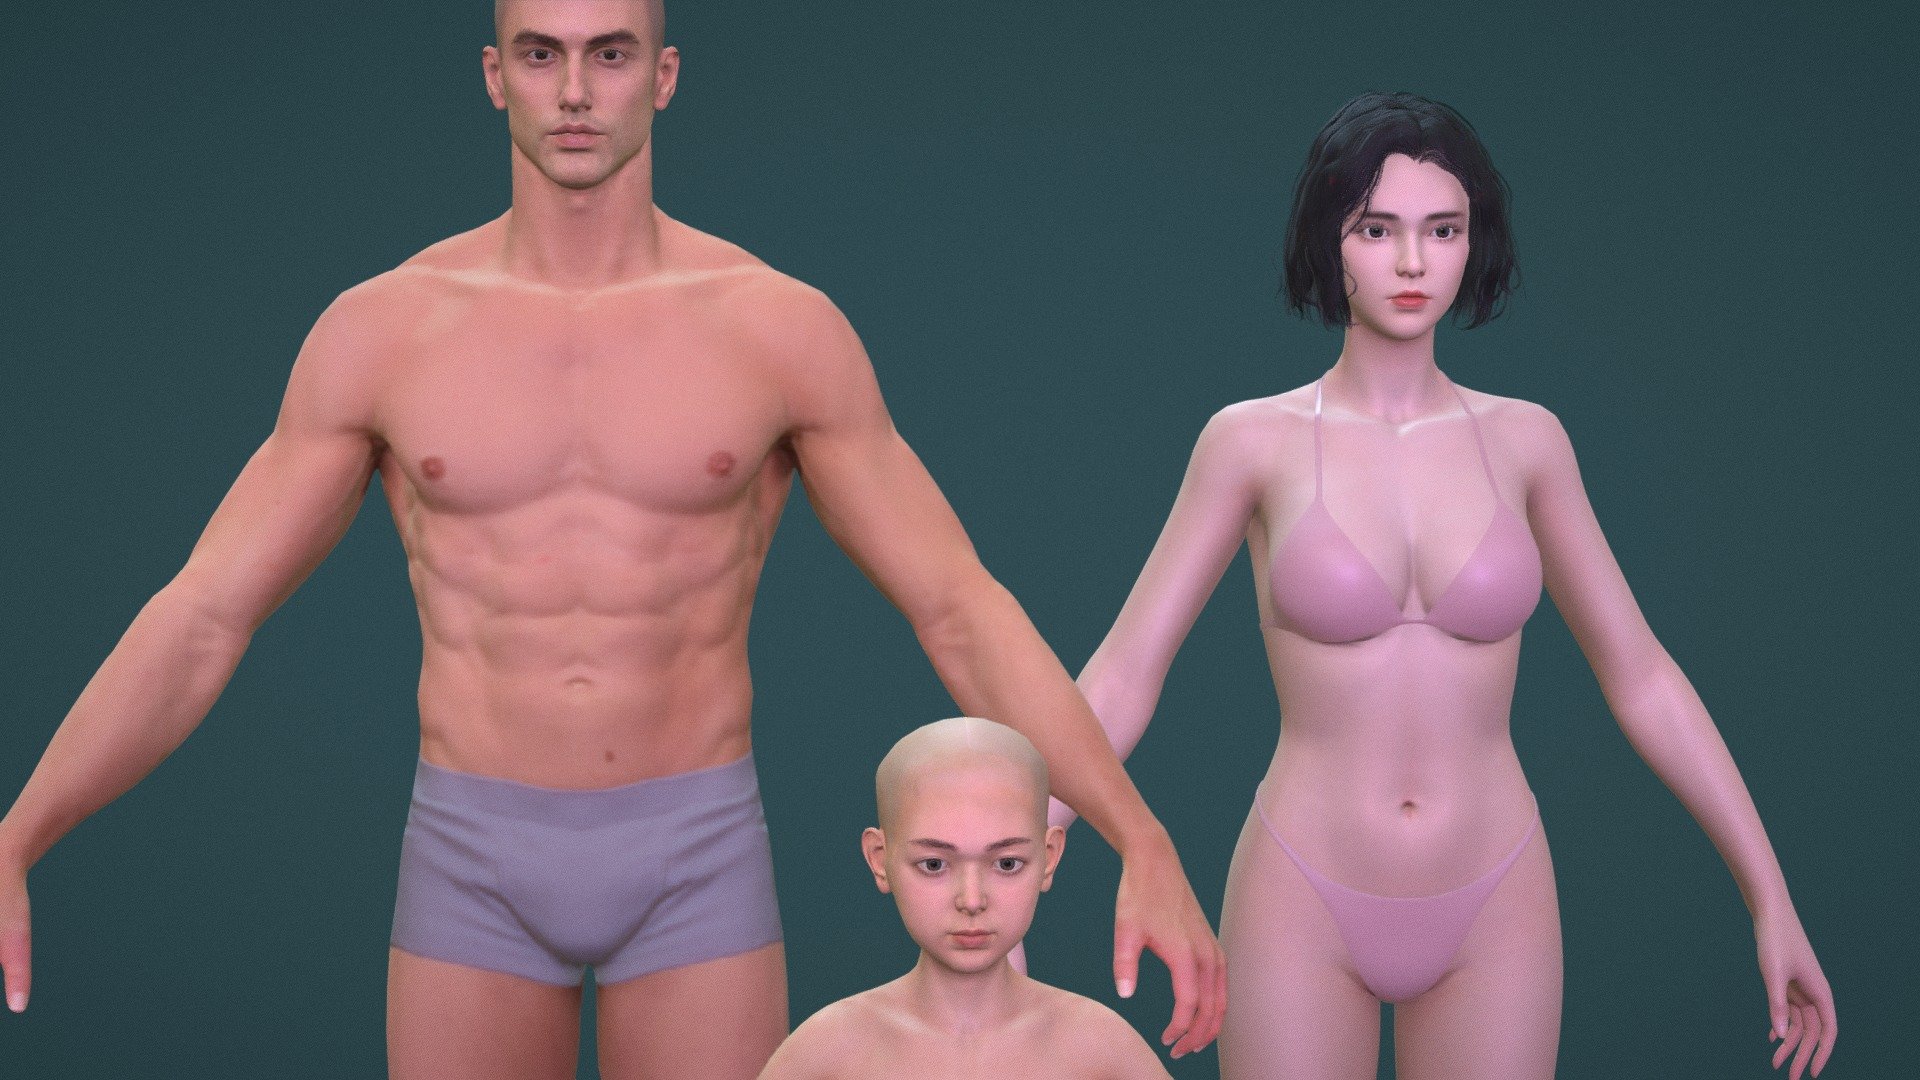 Realistic 3 characters man woman Game Assets

Model Includes:
-maya(2019)
-FBX exported from maya
-dea files
-obj files

Textures Includes:
Body texture：4096*4096 contains：dIffuse specular gloss and Normal map PBR pipeline .

head texture：4096*4096 contains：dIffuse specular gloss and Normal map PBR pipeline .

Eye textures:512*512 contains：dIffuse  Normal map Height PBR pipeline .

Brows textures:512*512  dIffuse opcity map

Eyelash:512*512  dIffuse opcity map

Hope you like my like,cheers~

Highpoly version:
https://sketchfab.com/3d-models/realistic-3-characters-man-woman-child-highpoly-0c51abd24b4342c292e891730a907459 - Realistic 3 characters man woman Game Assets - Buy Royalty Free 3D model by Vincent Page (@vincentpage) 3d model